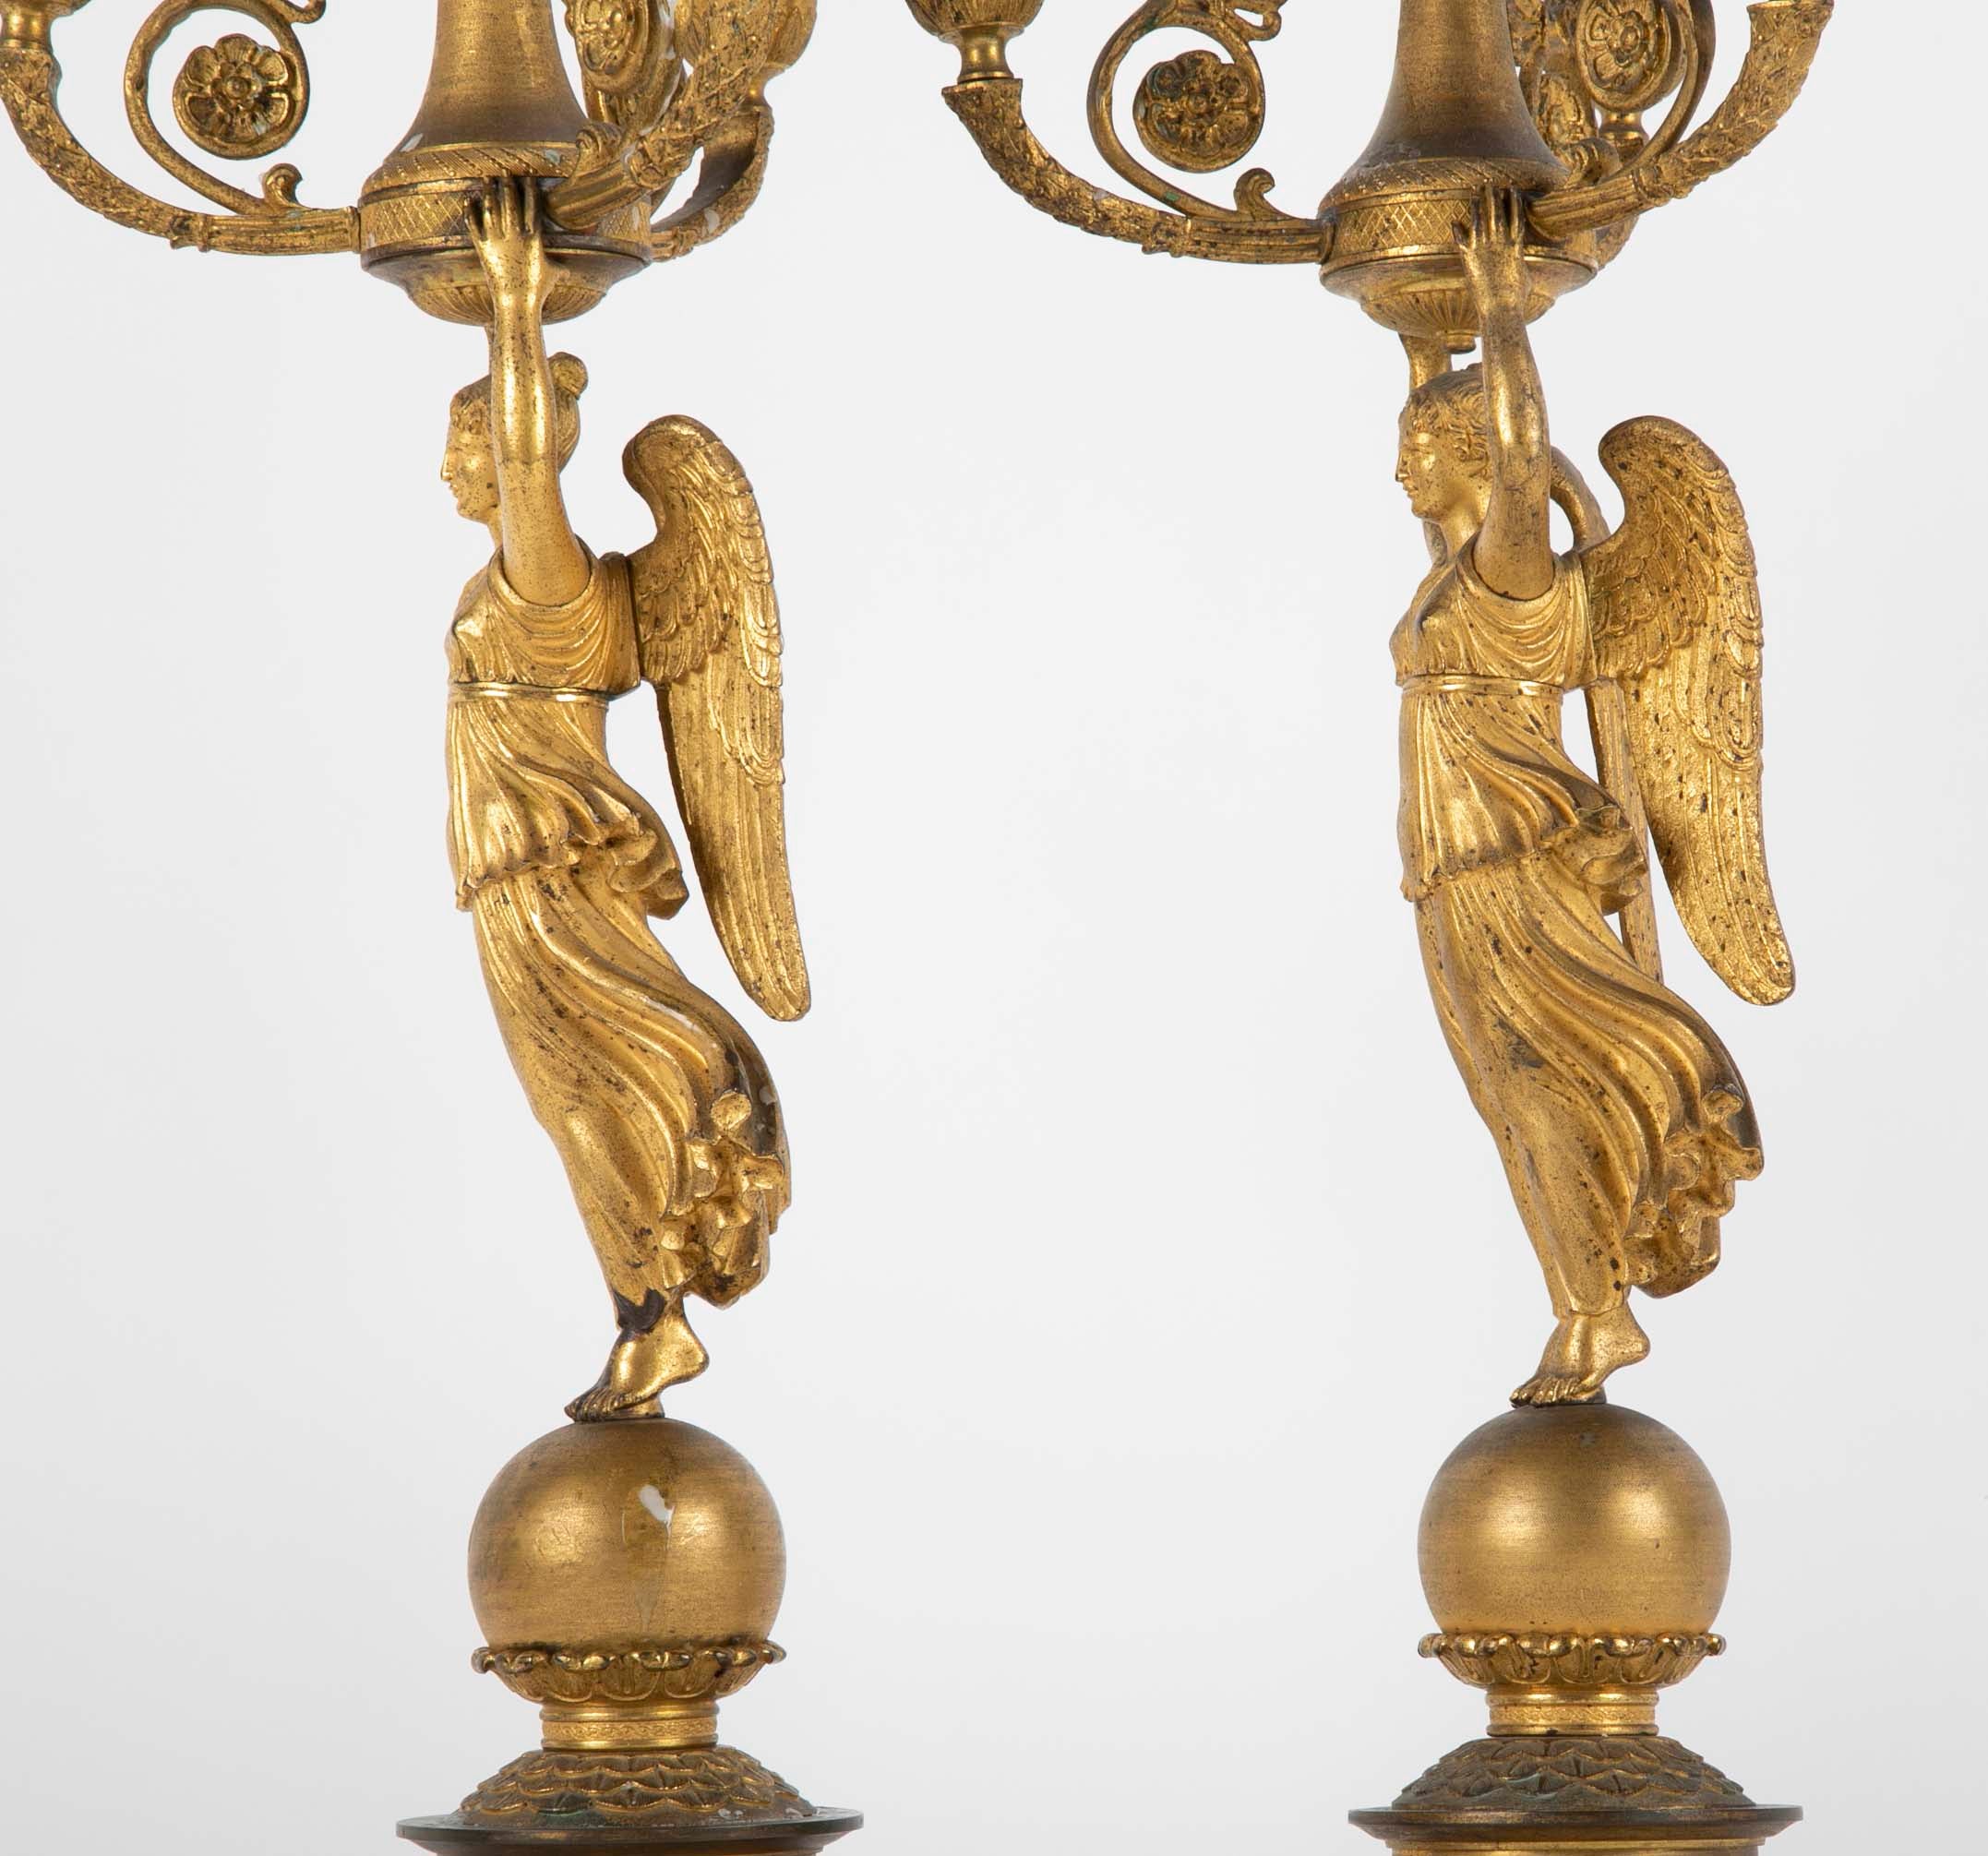 Pair of Russian Empire D'ore Bronze Candelabra with Porphyry Base